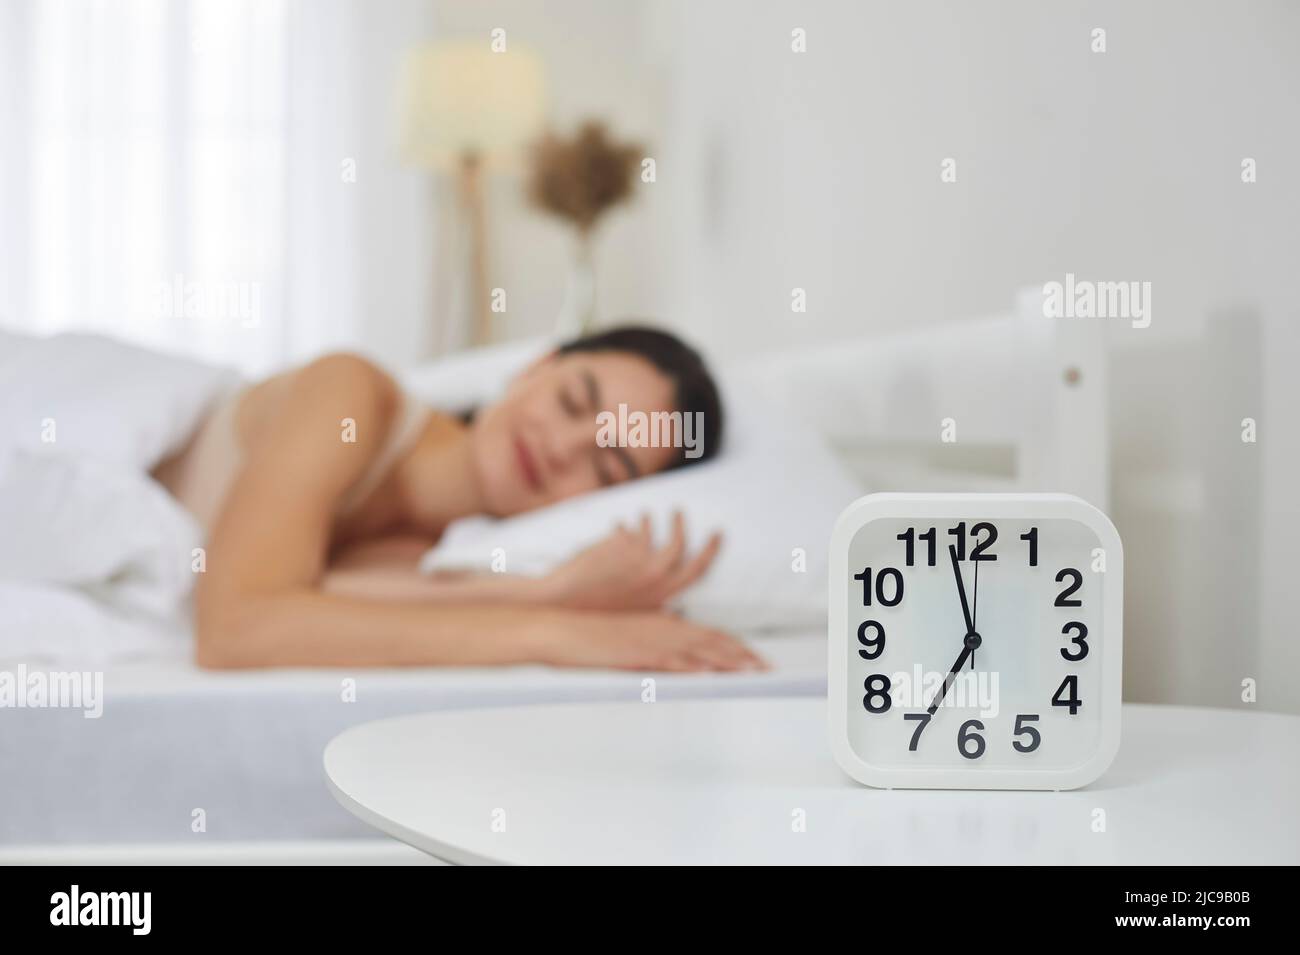 Alarm clock set for 7 AM on bedside table, with happy woman sleeping on bed in background Stock Photo